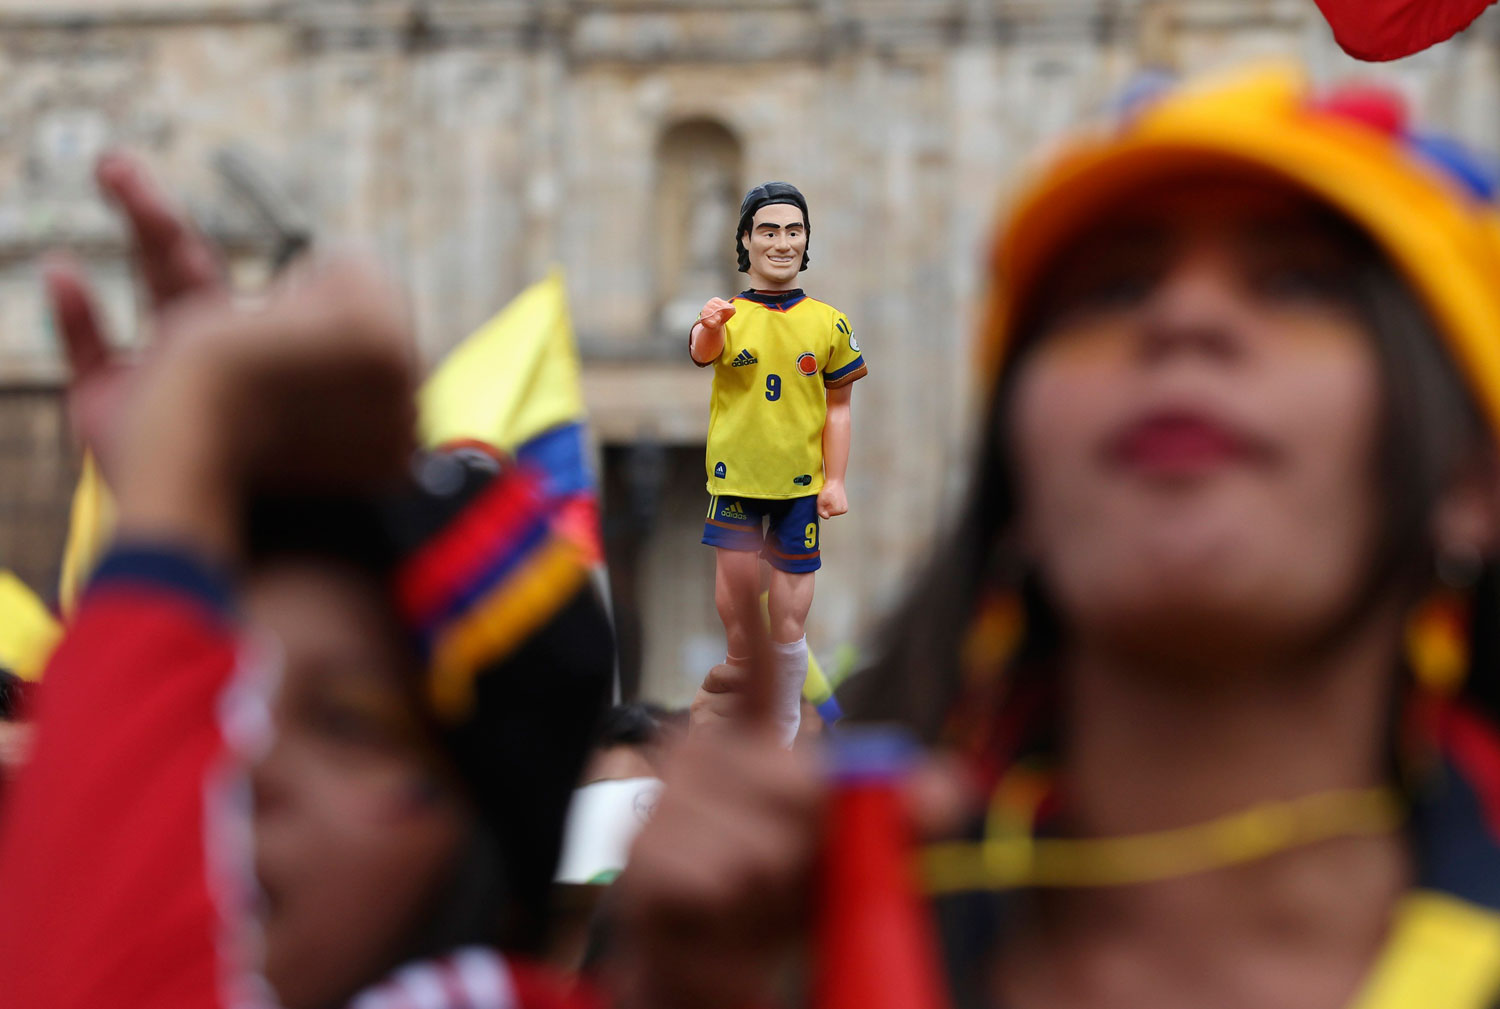 Colombia's fans hold a toy figurine of Colombia's national soccer player Falcao as they watch a broadcast of the game between Colombia and Uruguay, at Bolivar Square in Bogota on June 28, 2014.